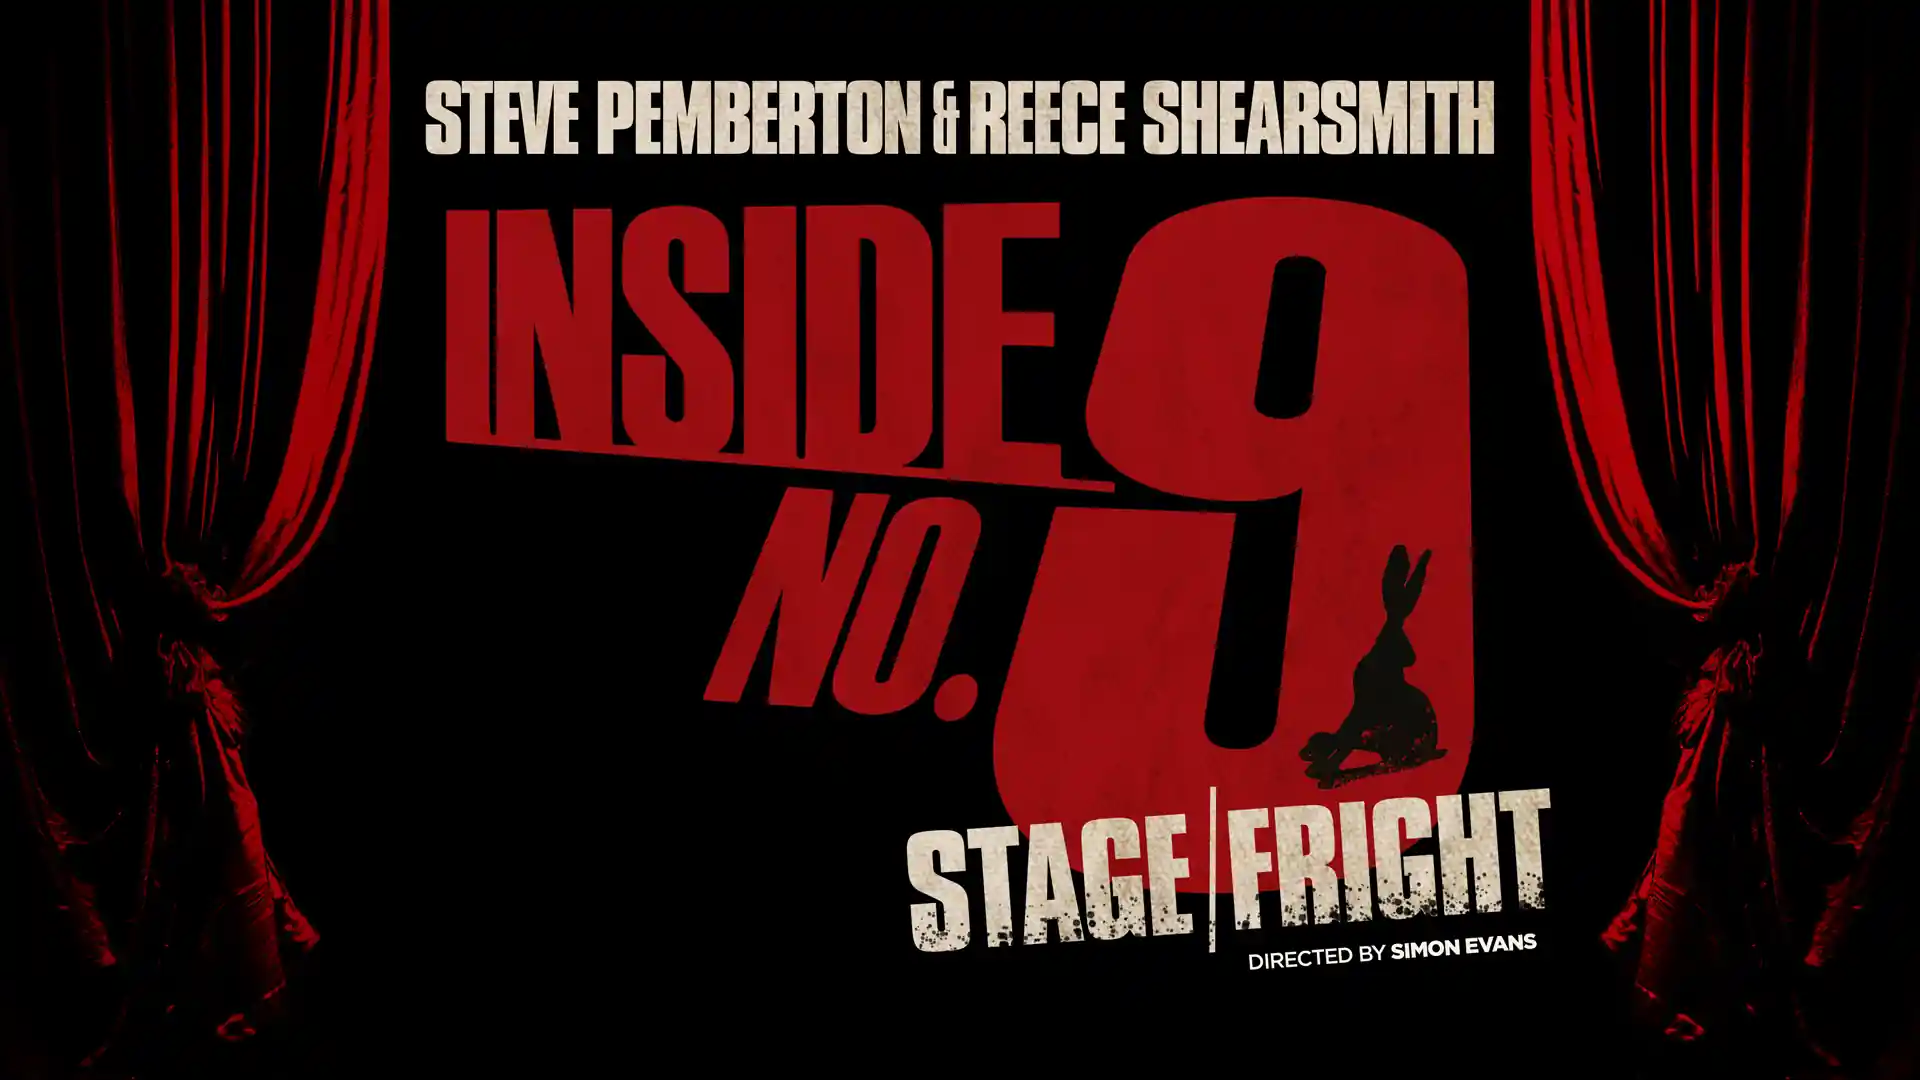 Inside No. 9 Stage/Fright at Wyndham's Theatre in London